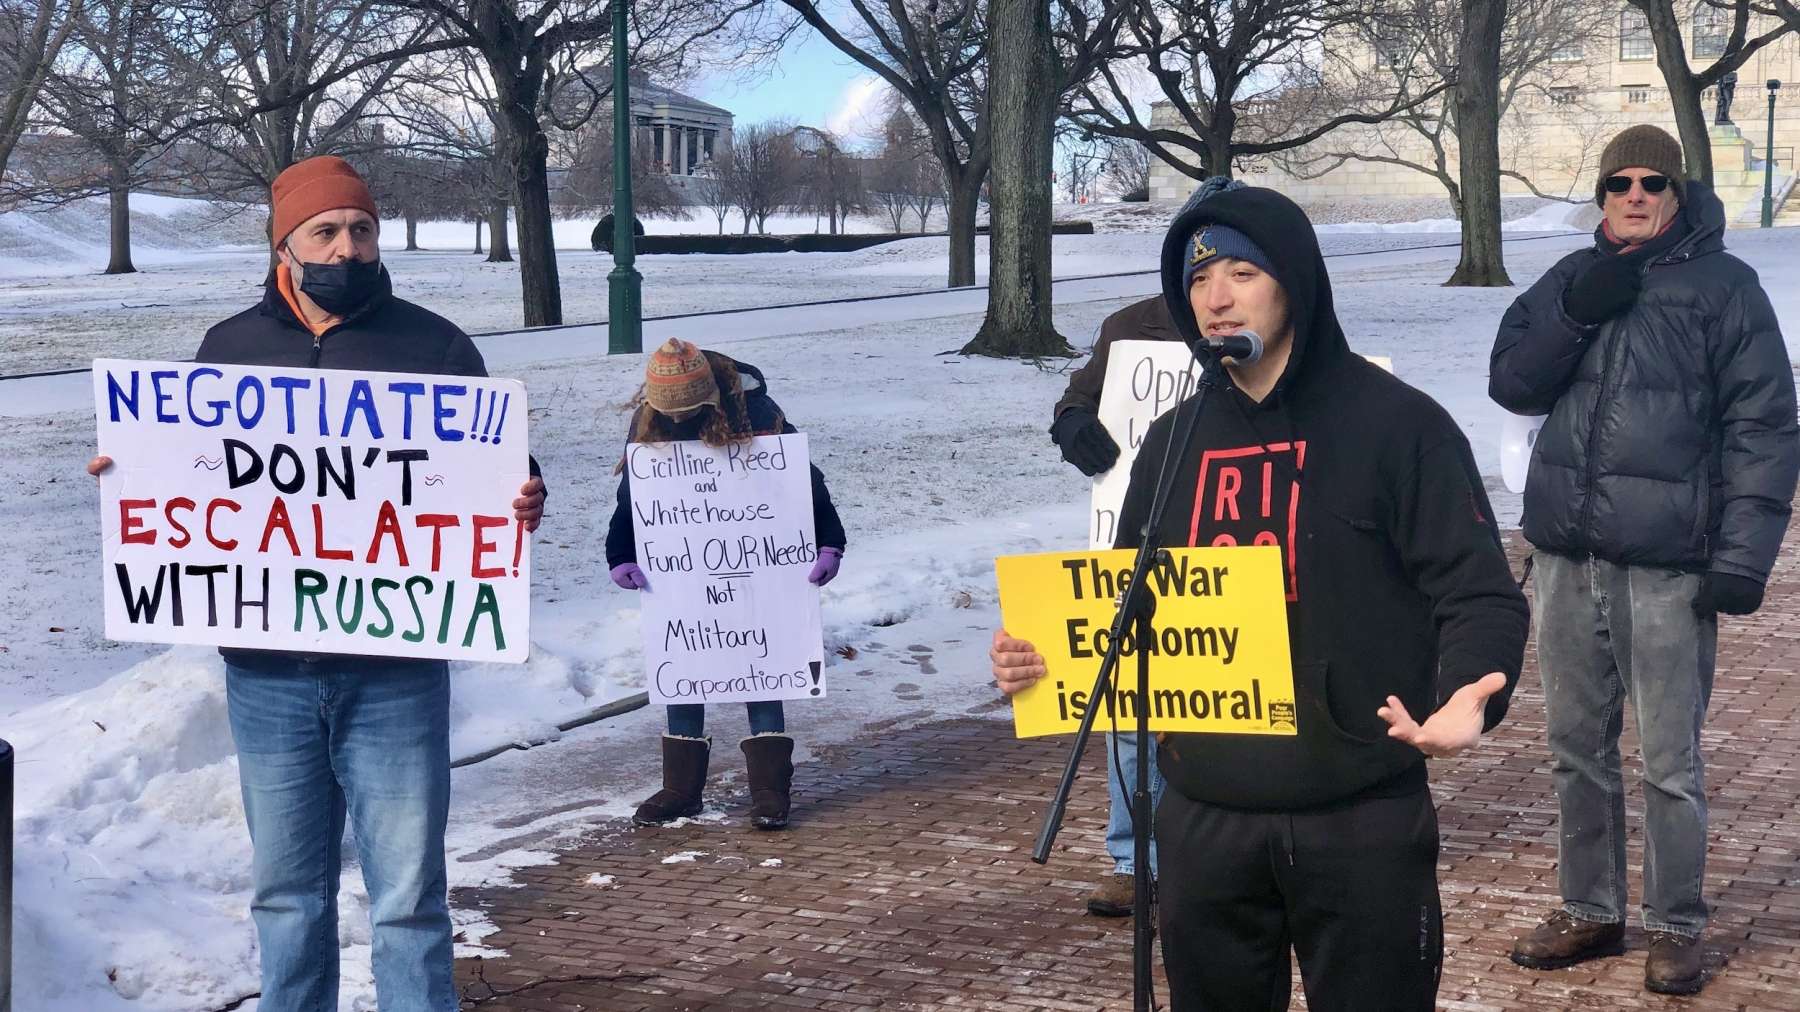 Providence joins antiwar protests around the world urging no US military action in Ukraine